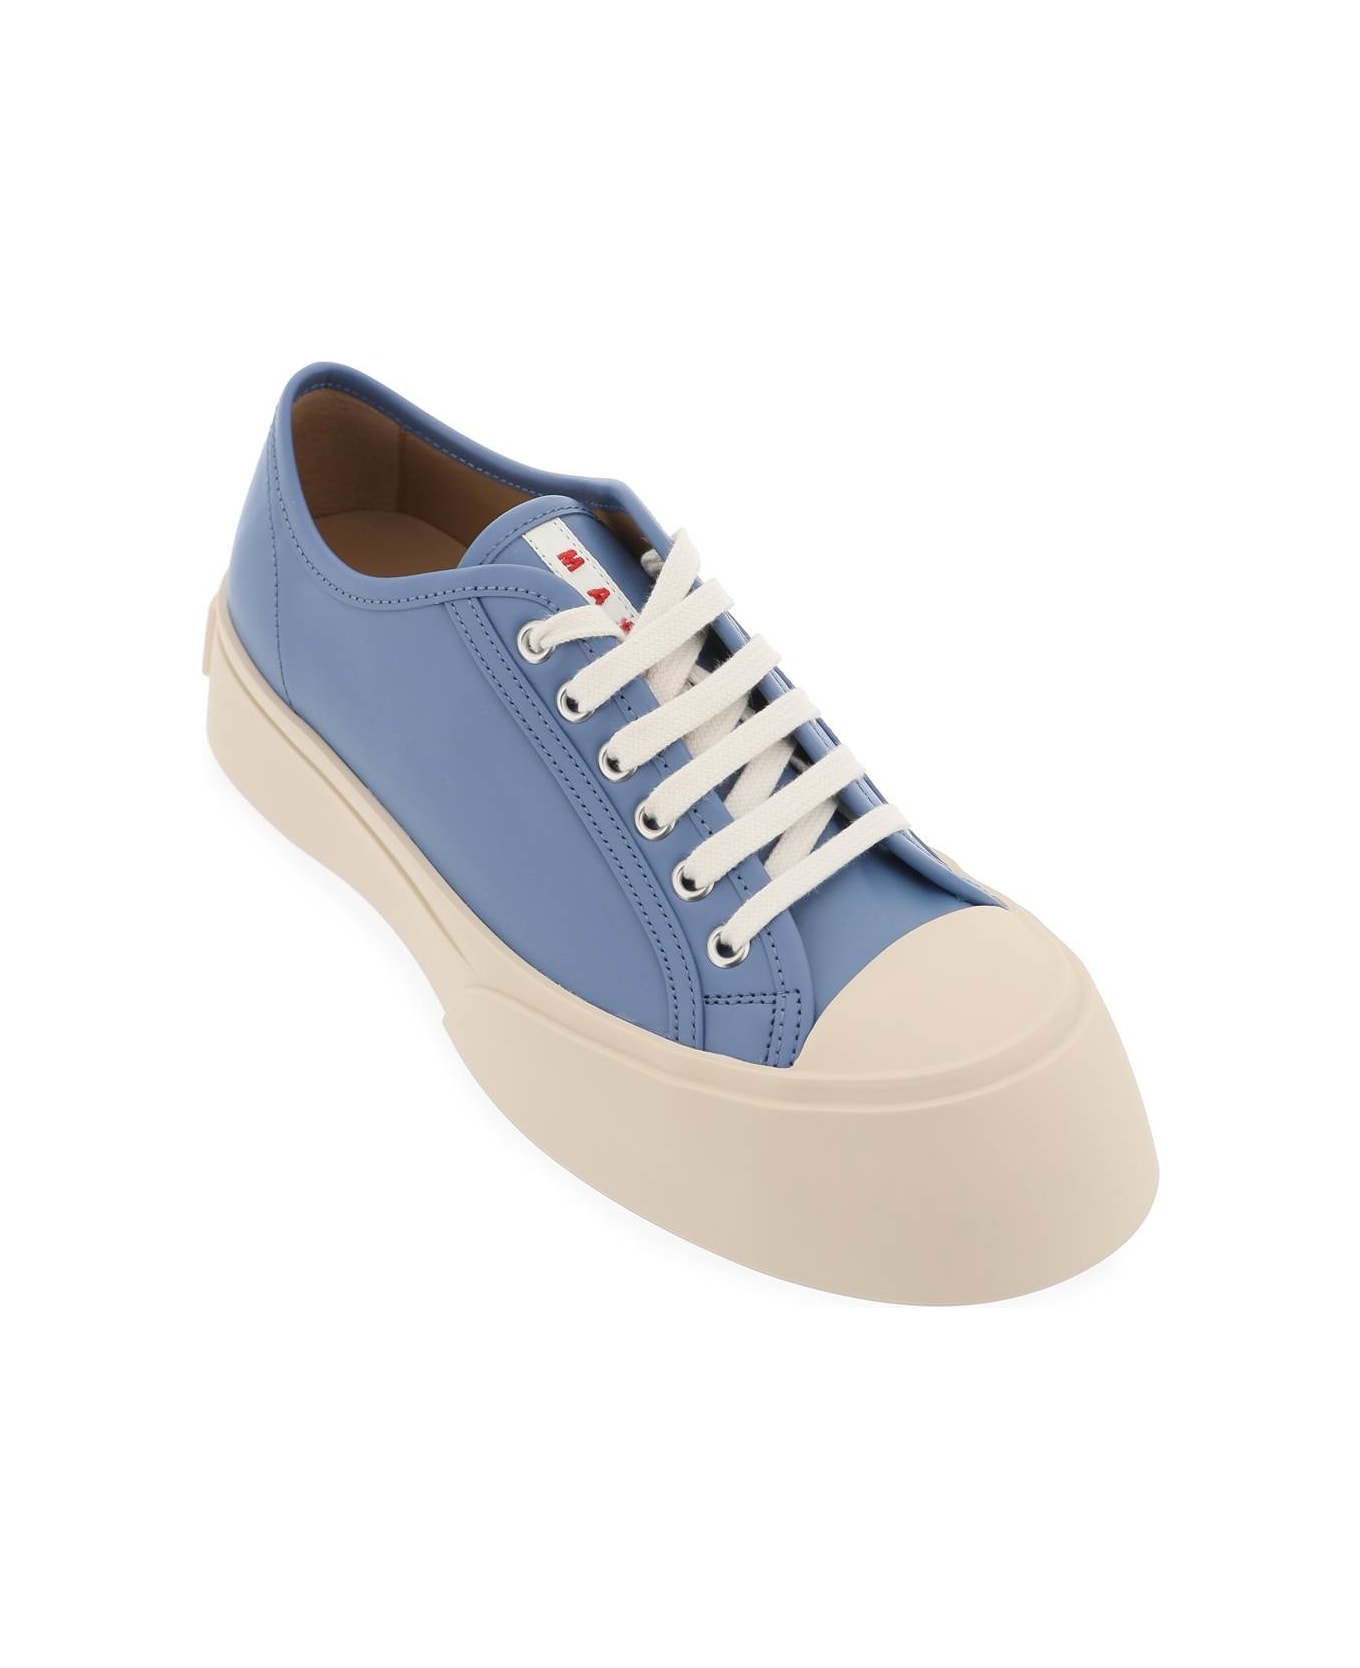 Marni Cerulean Blue Leather Pablo Sneakers - 00B37 スニーカー